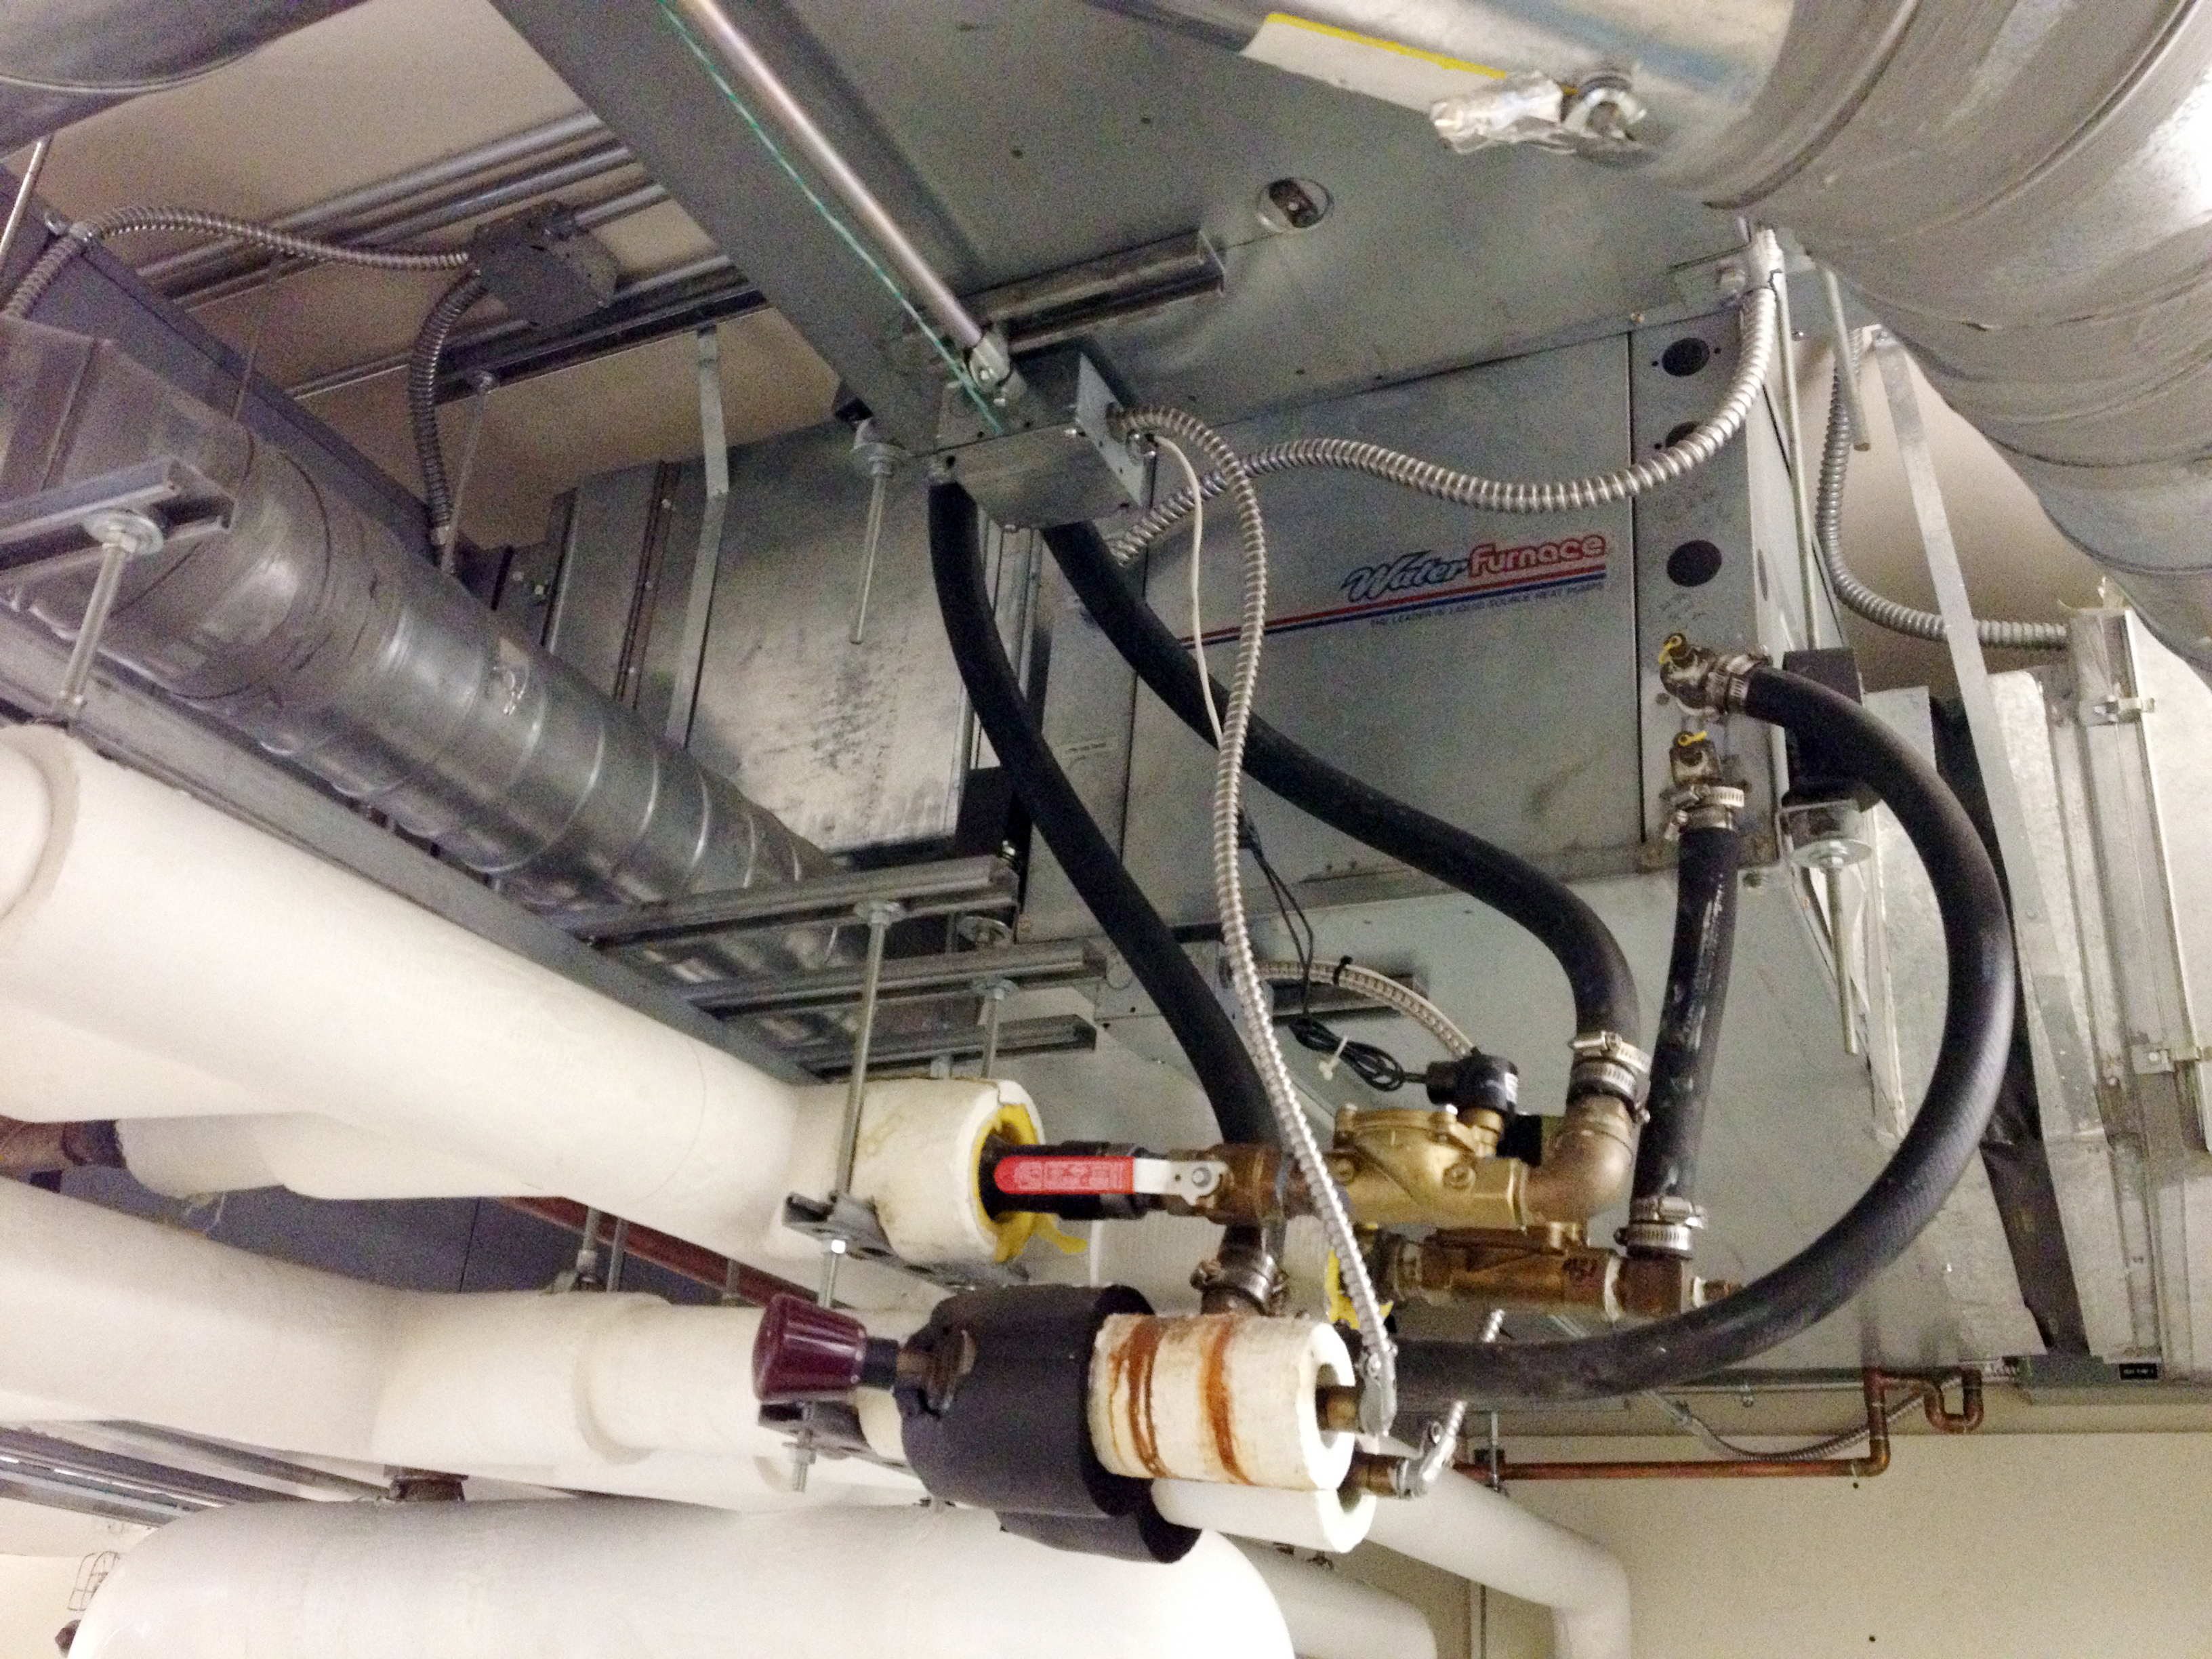 Part of the heat pump system at AEL&P. (Photo provided by Alec Mesdag)